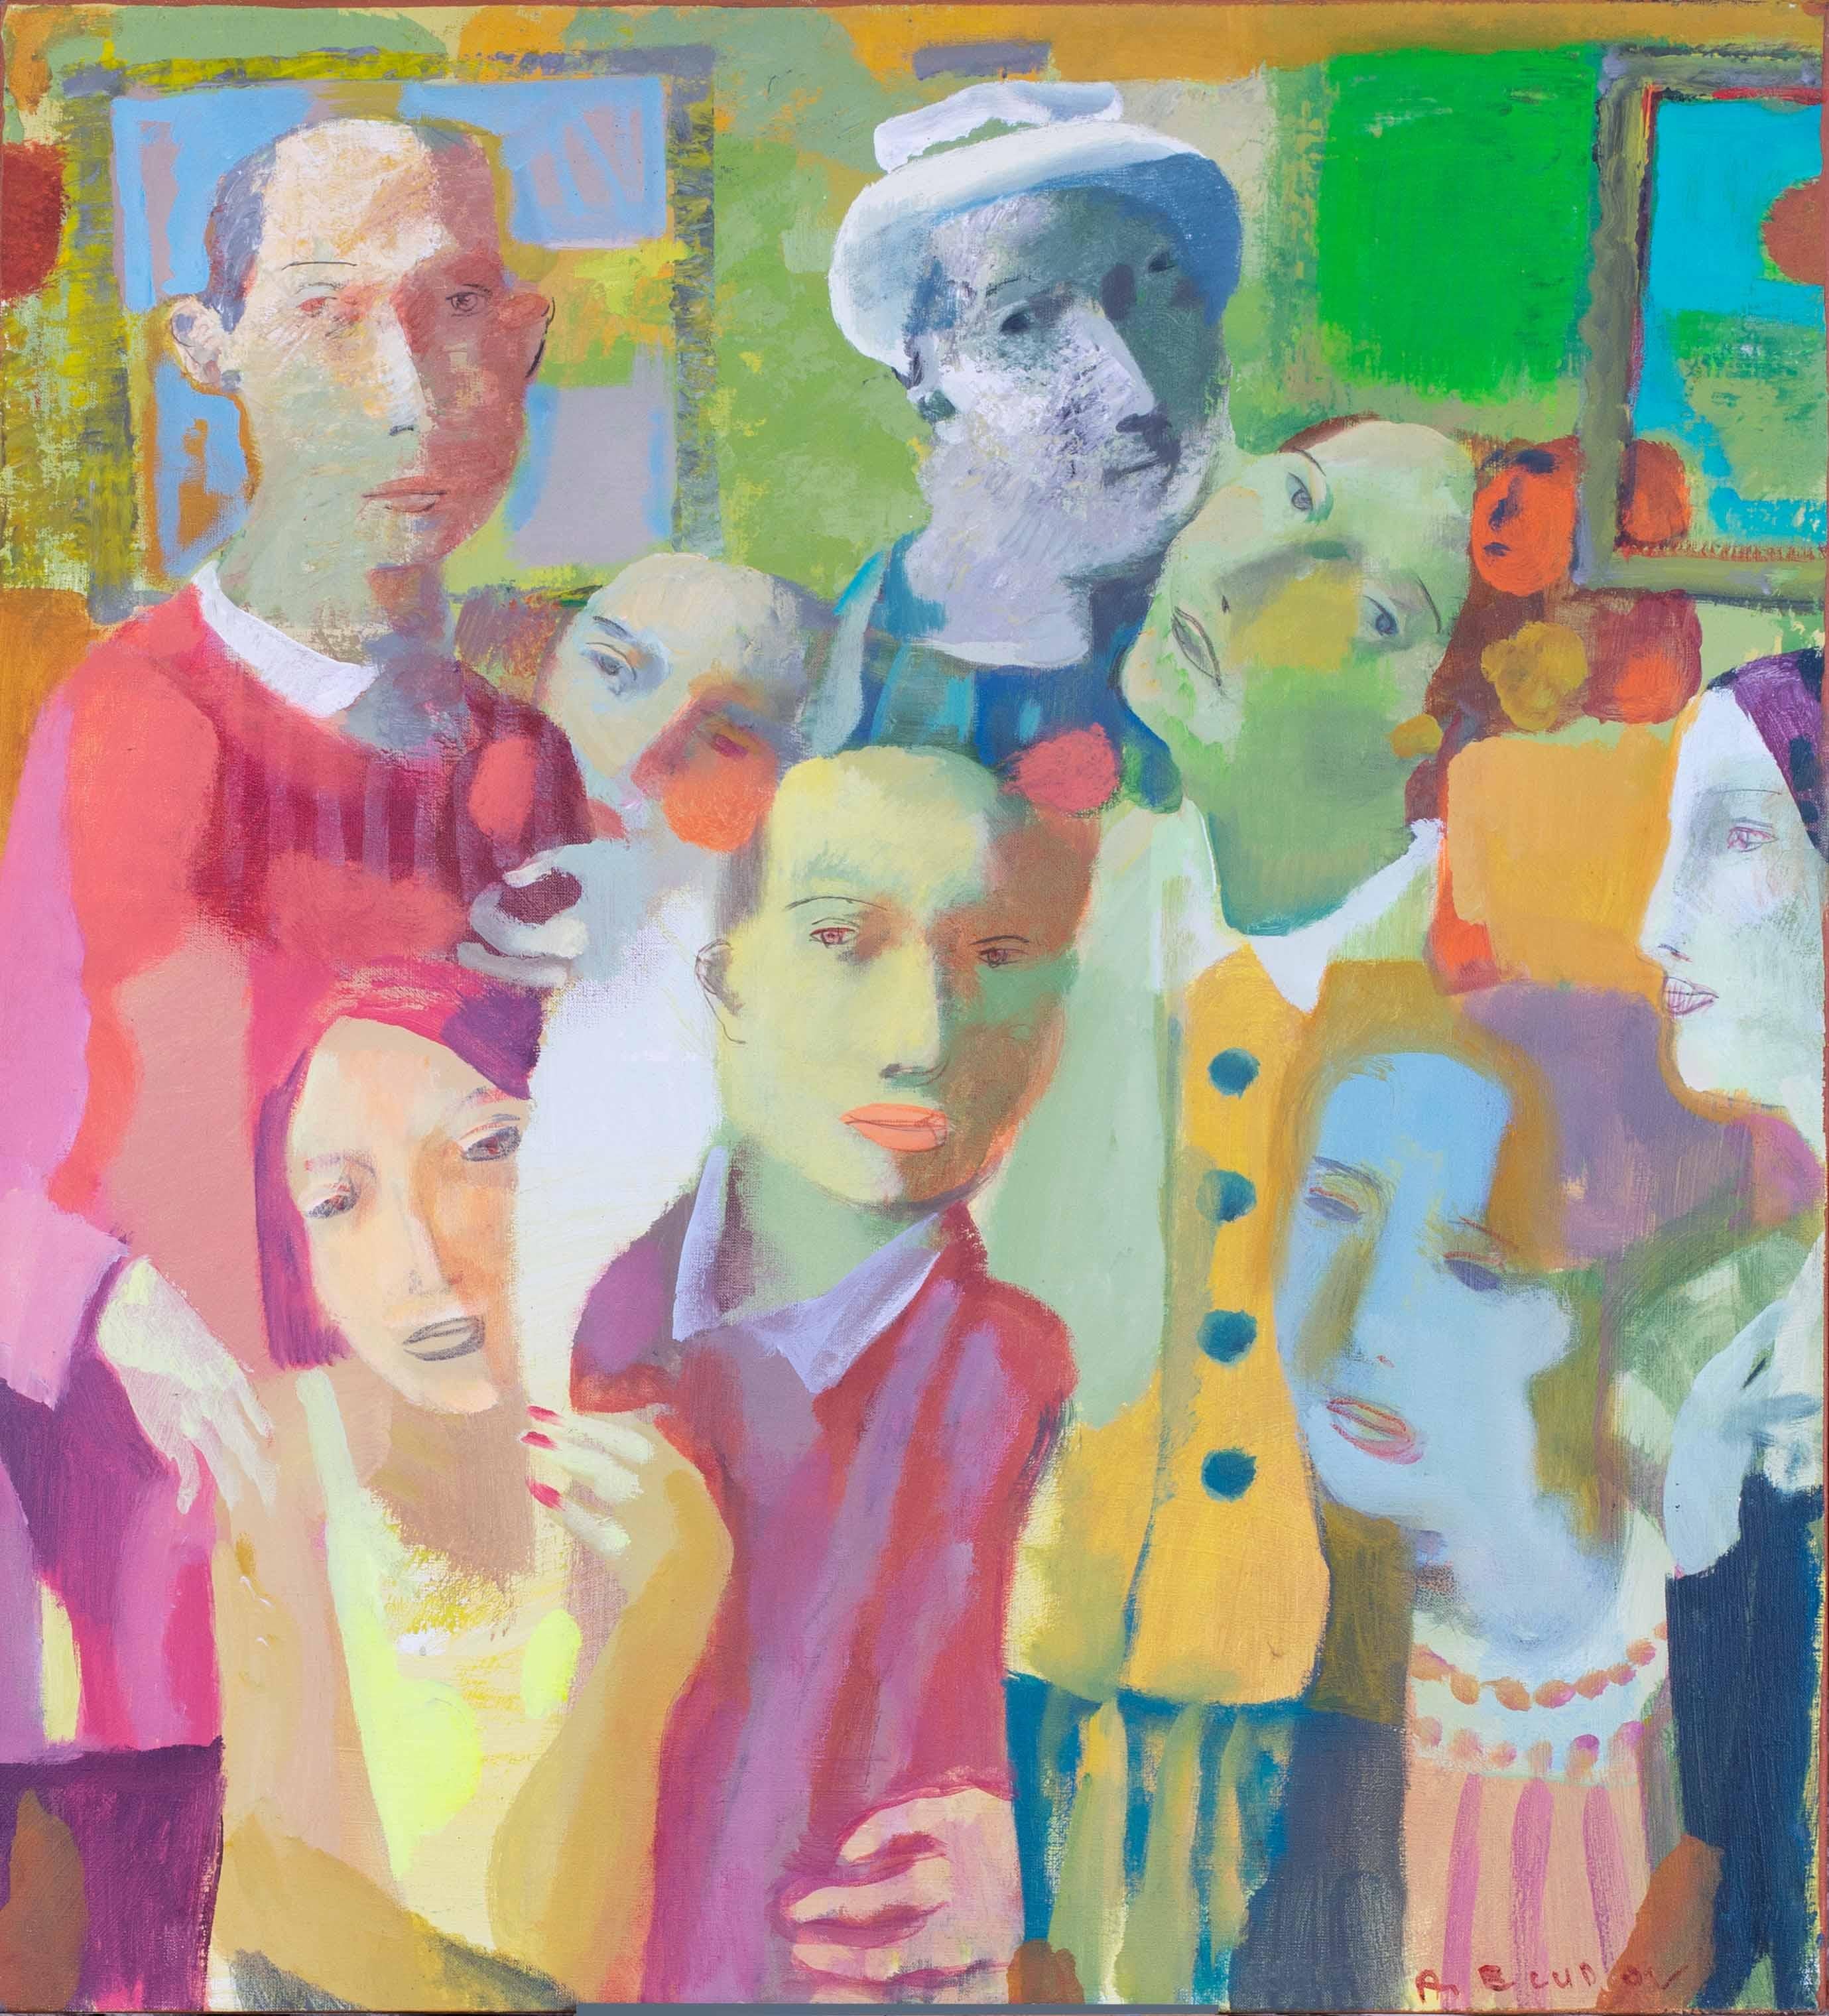 Contemporary Ukrainian oil painting 'Family' by Andrei Bludov, greens and pinks - Painting by Andrei Bludov 